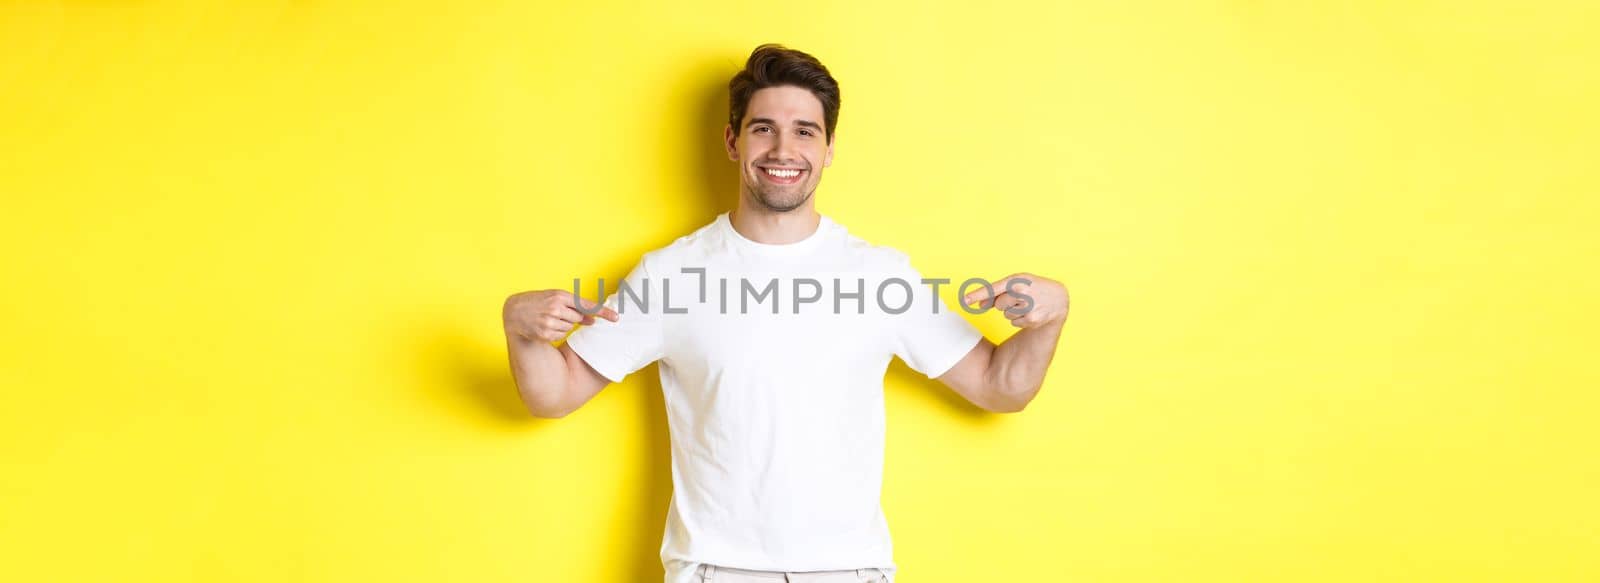 Happy attractive guy pointing fingers at your logo, showing promo on his t-shirt, standing over yellow background.